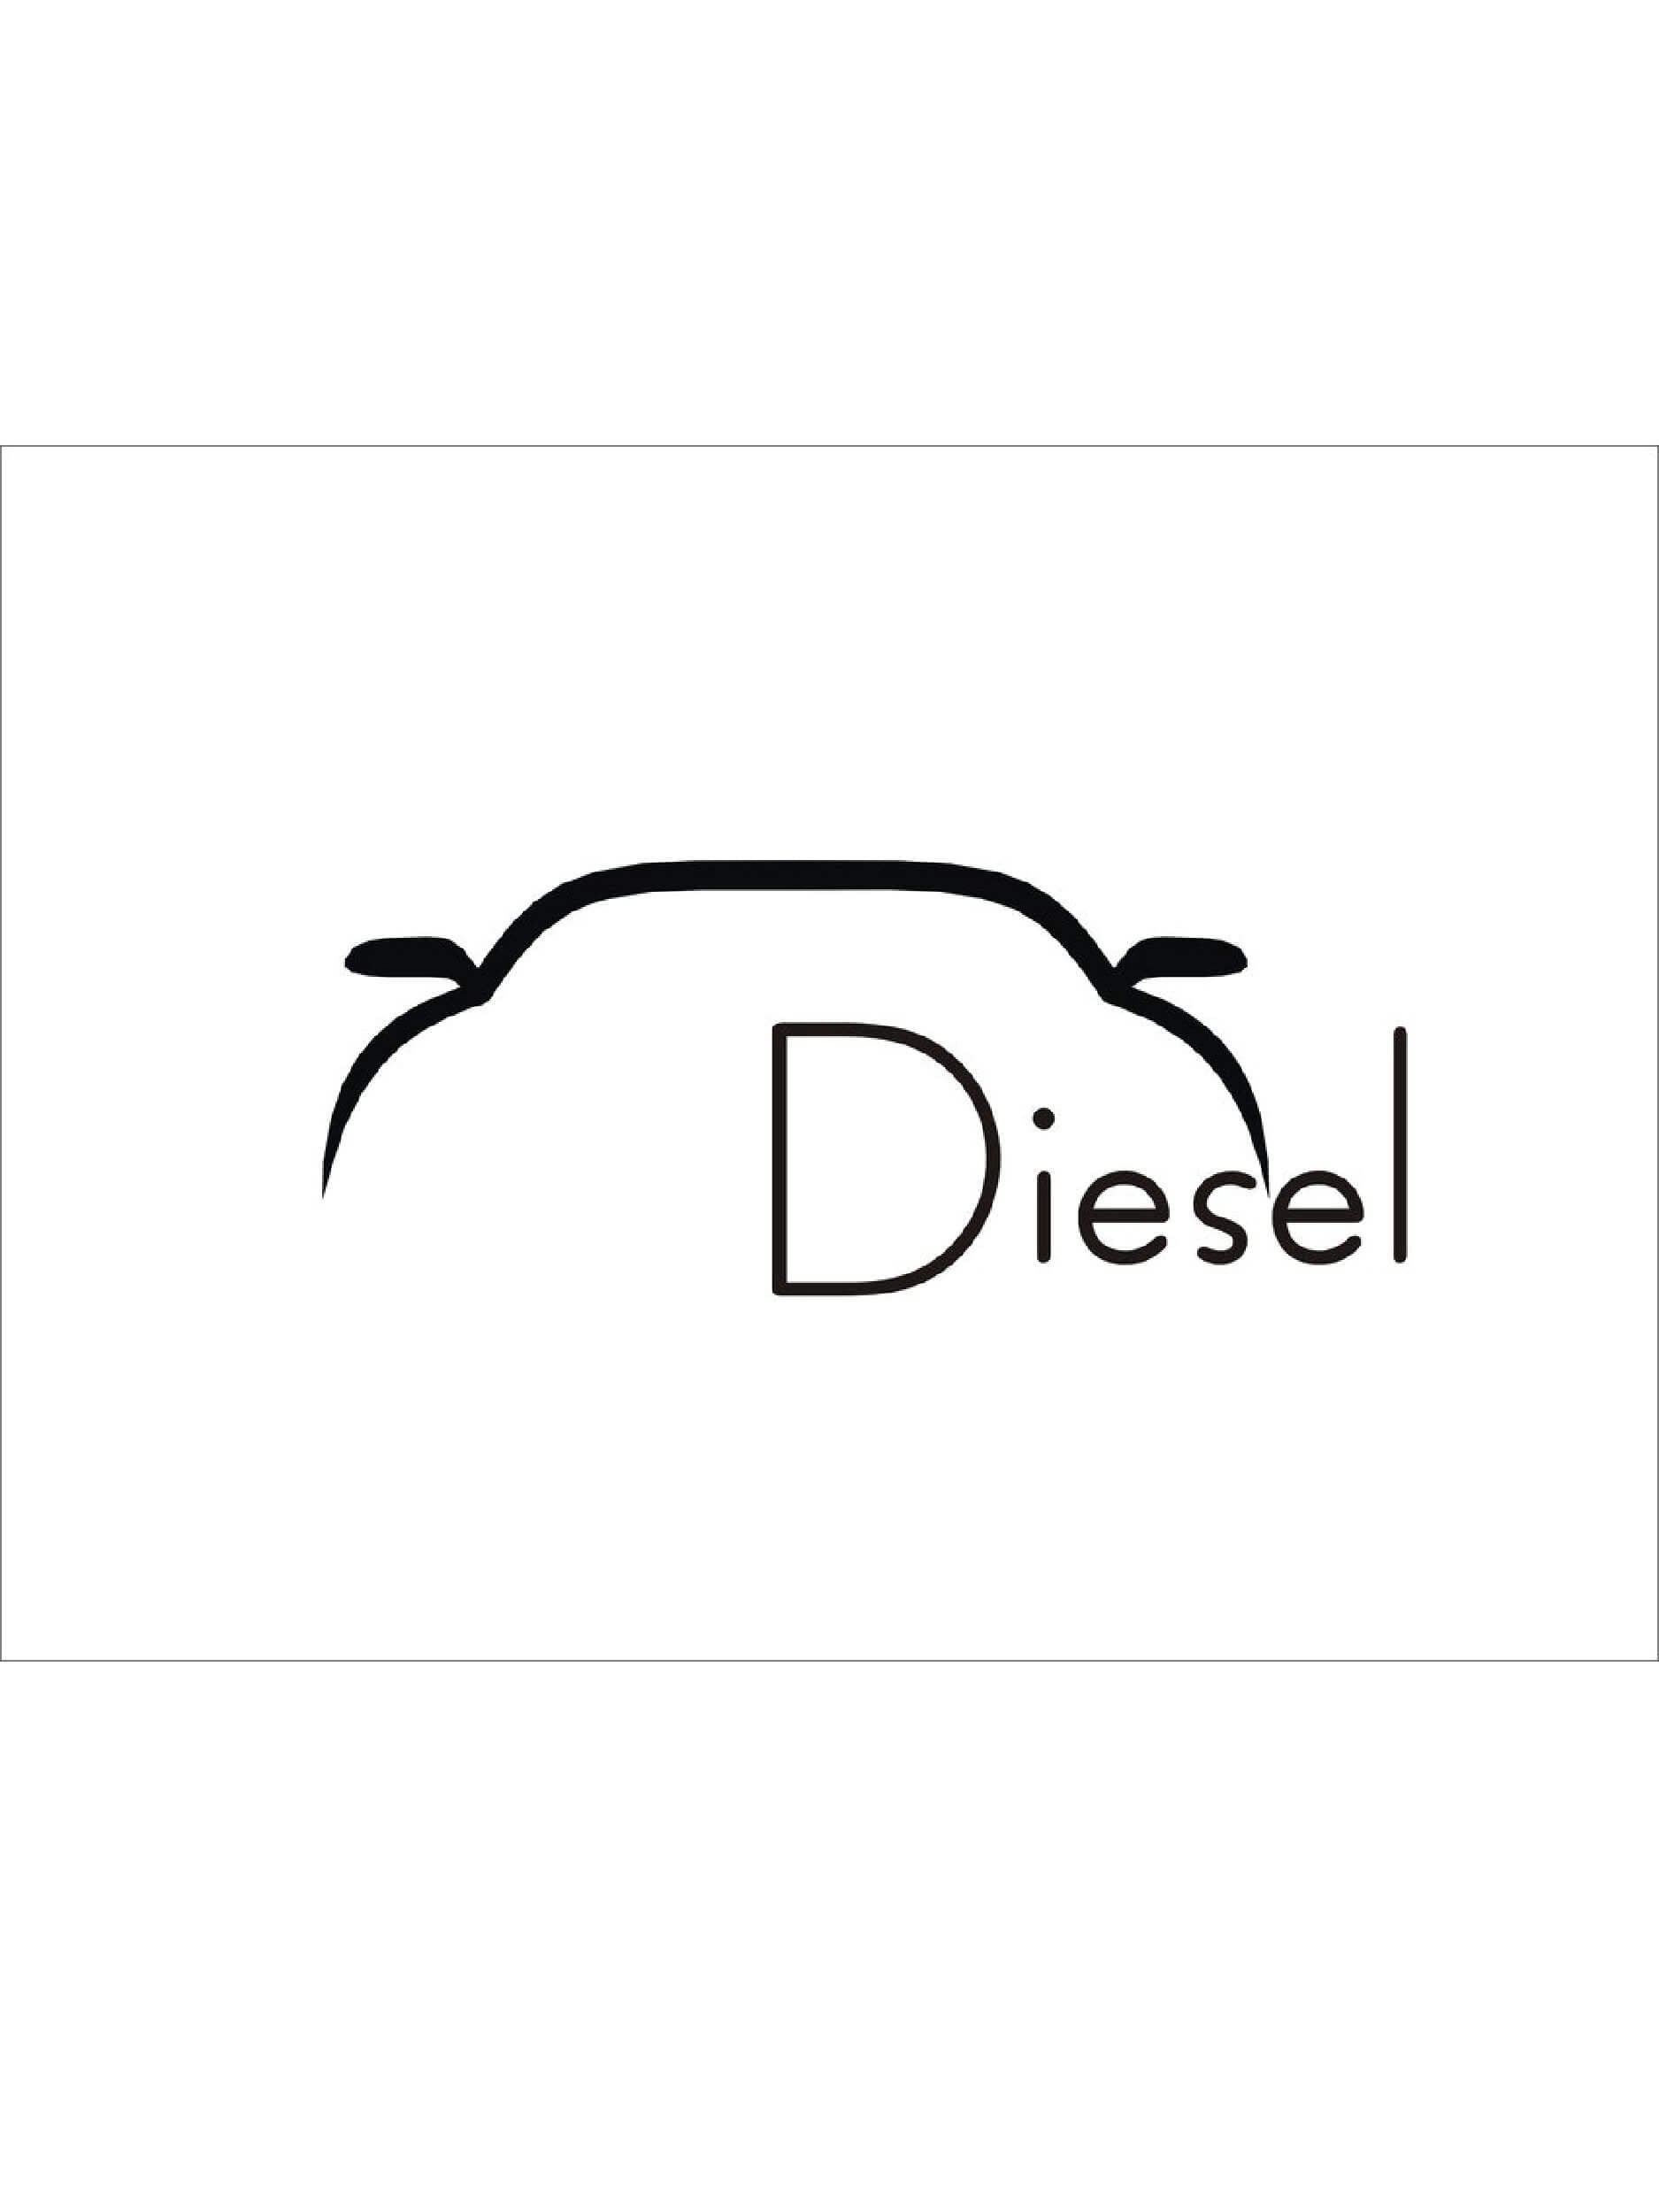 Buy AUTONEST Diesel Inside Decal/Sticker Car Fuel Lid (Round) (Red and  Black) (Sticker Size: 12.5cm X 12.5cm) (Pack of 1) for Tata Bolt Online at  Lowest Price Ever in India | Check